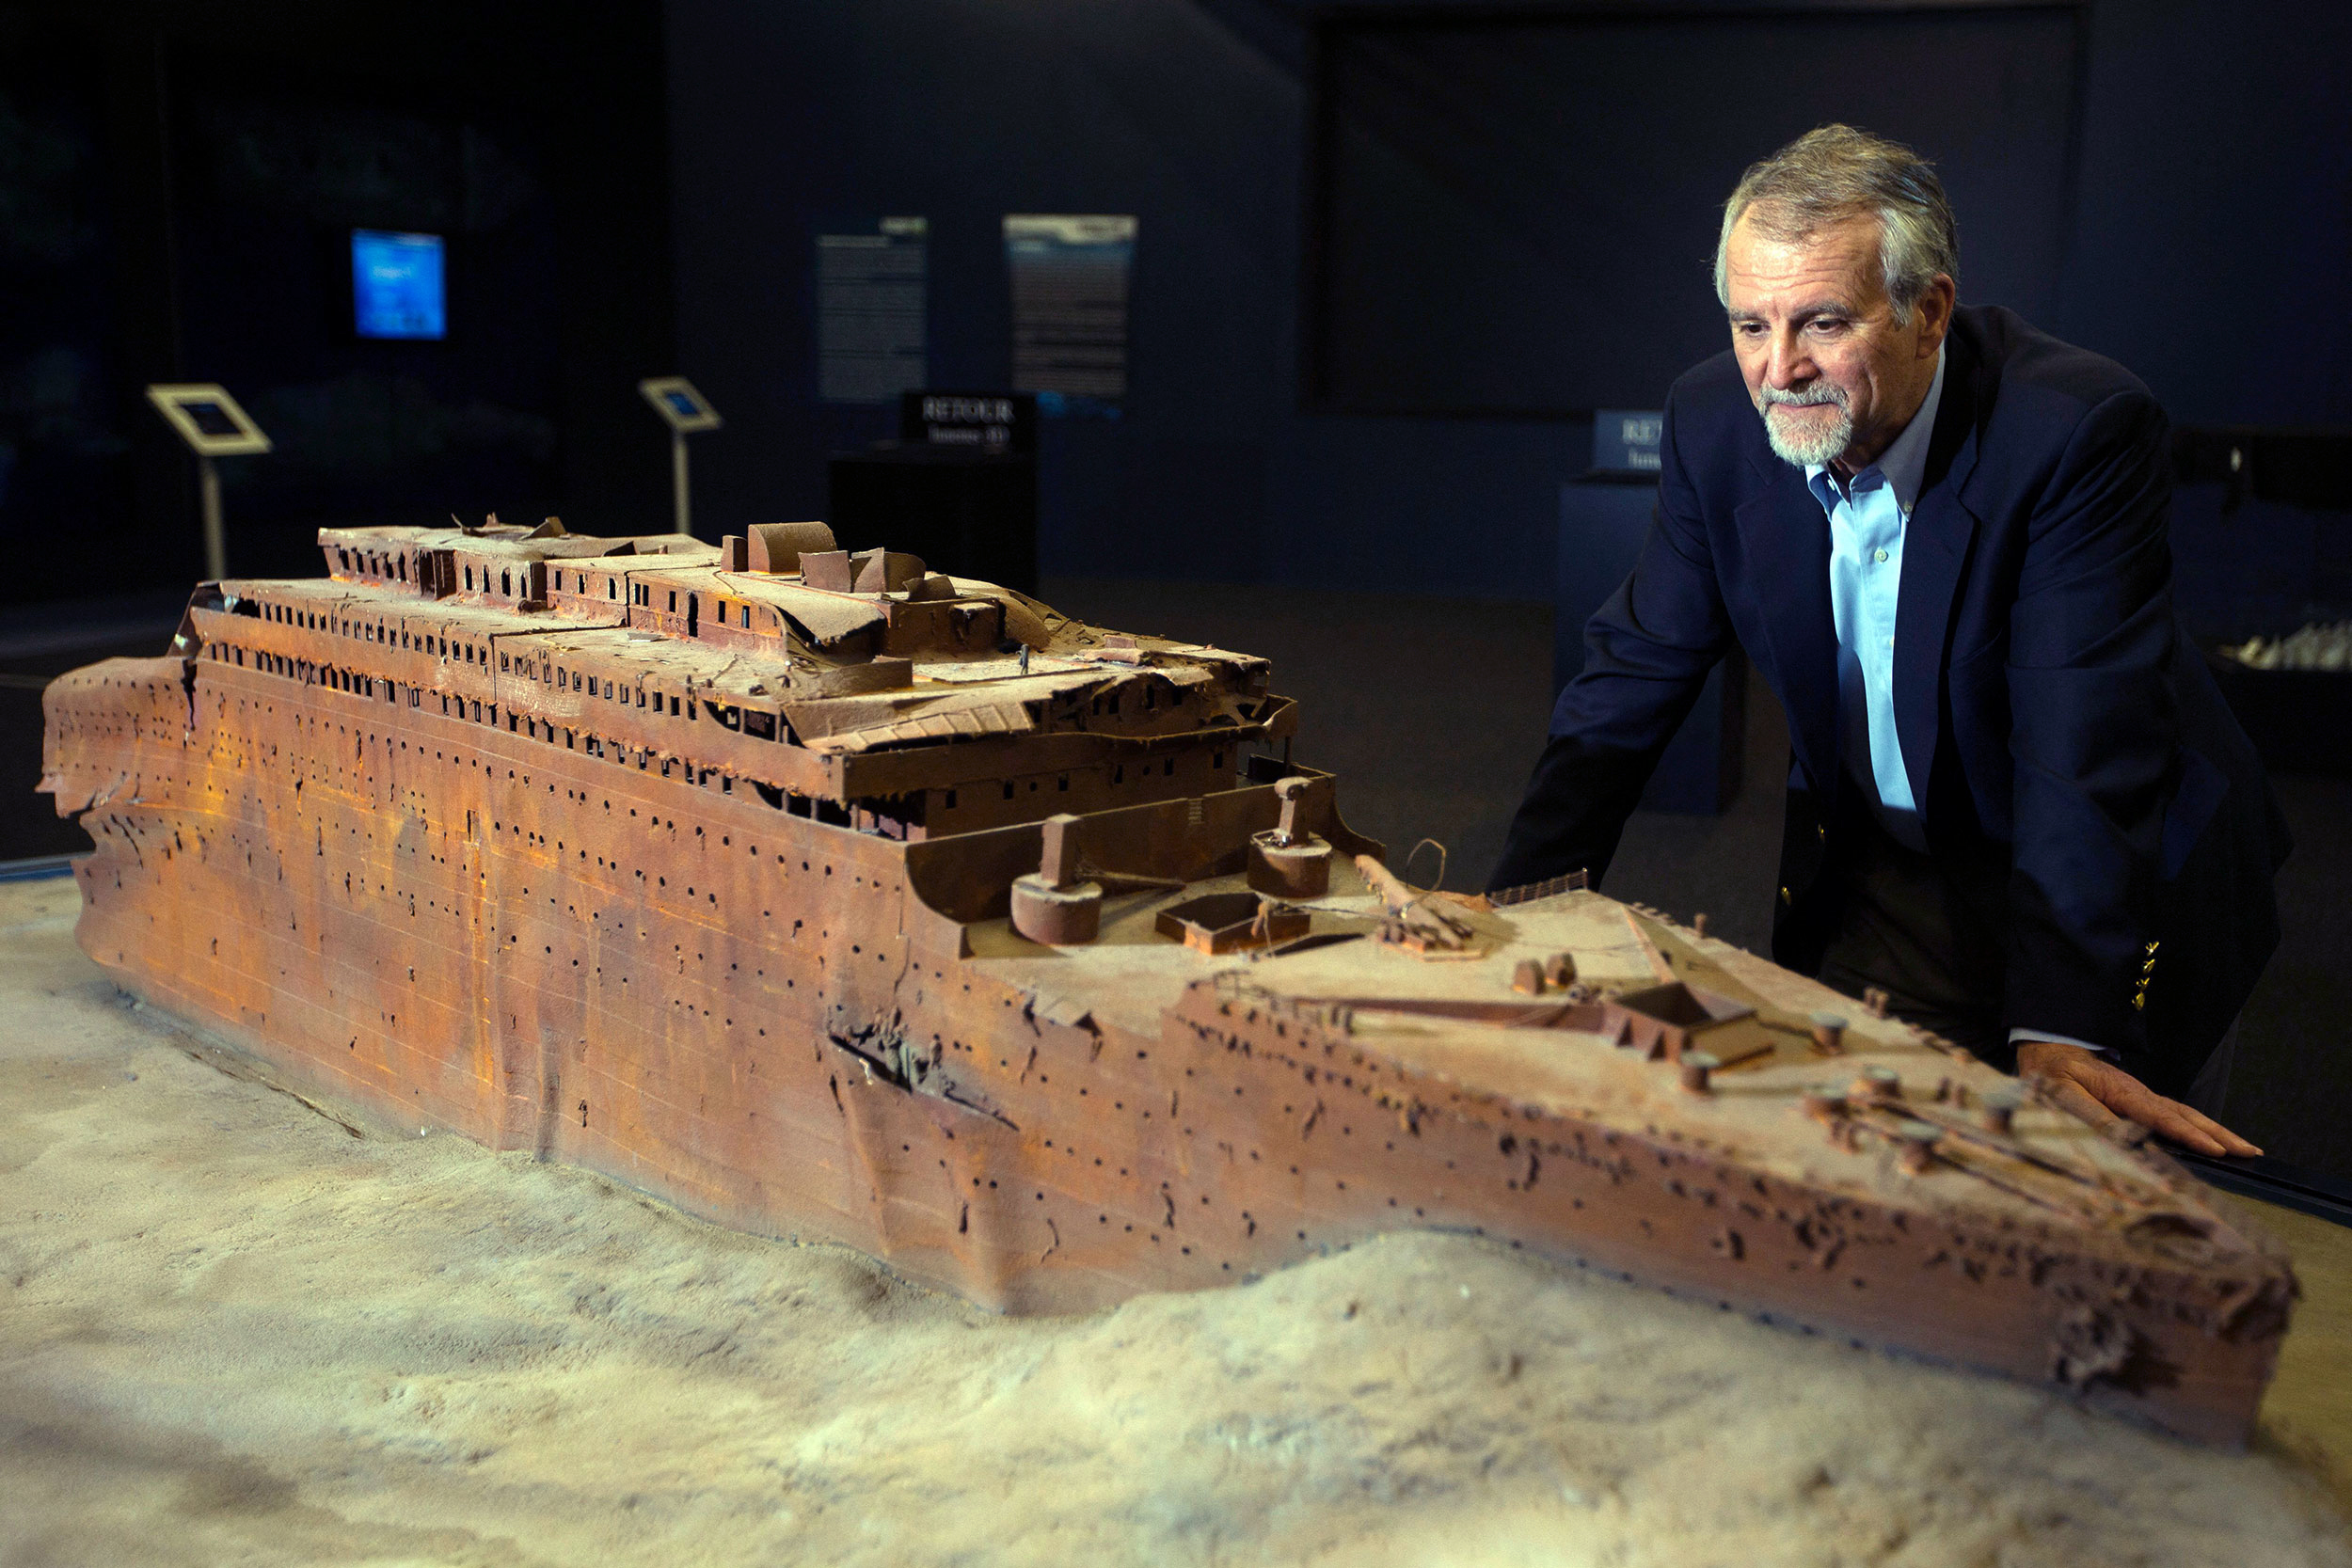 Paul-Henri Nargeolet poses next to a miniature version of the Titanic in Paris in 2013. 